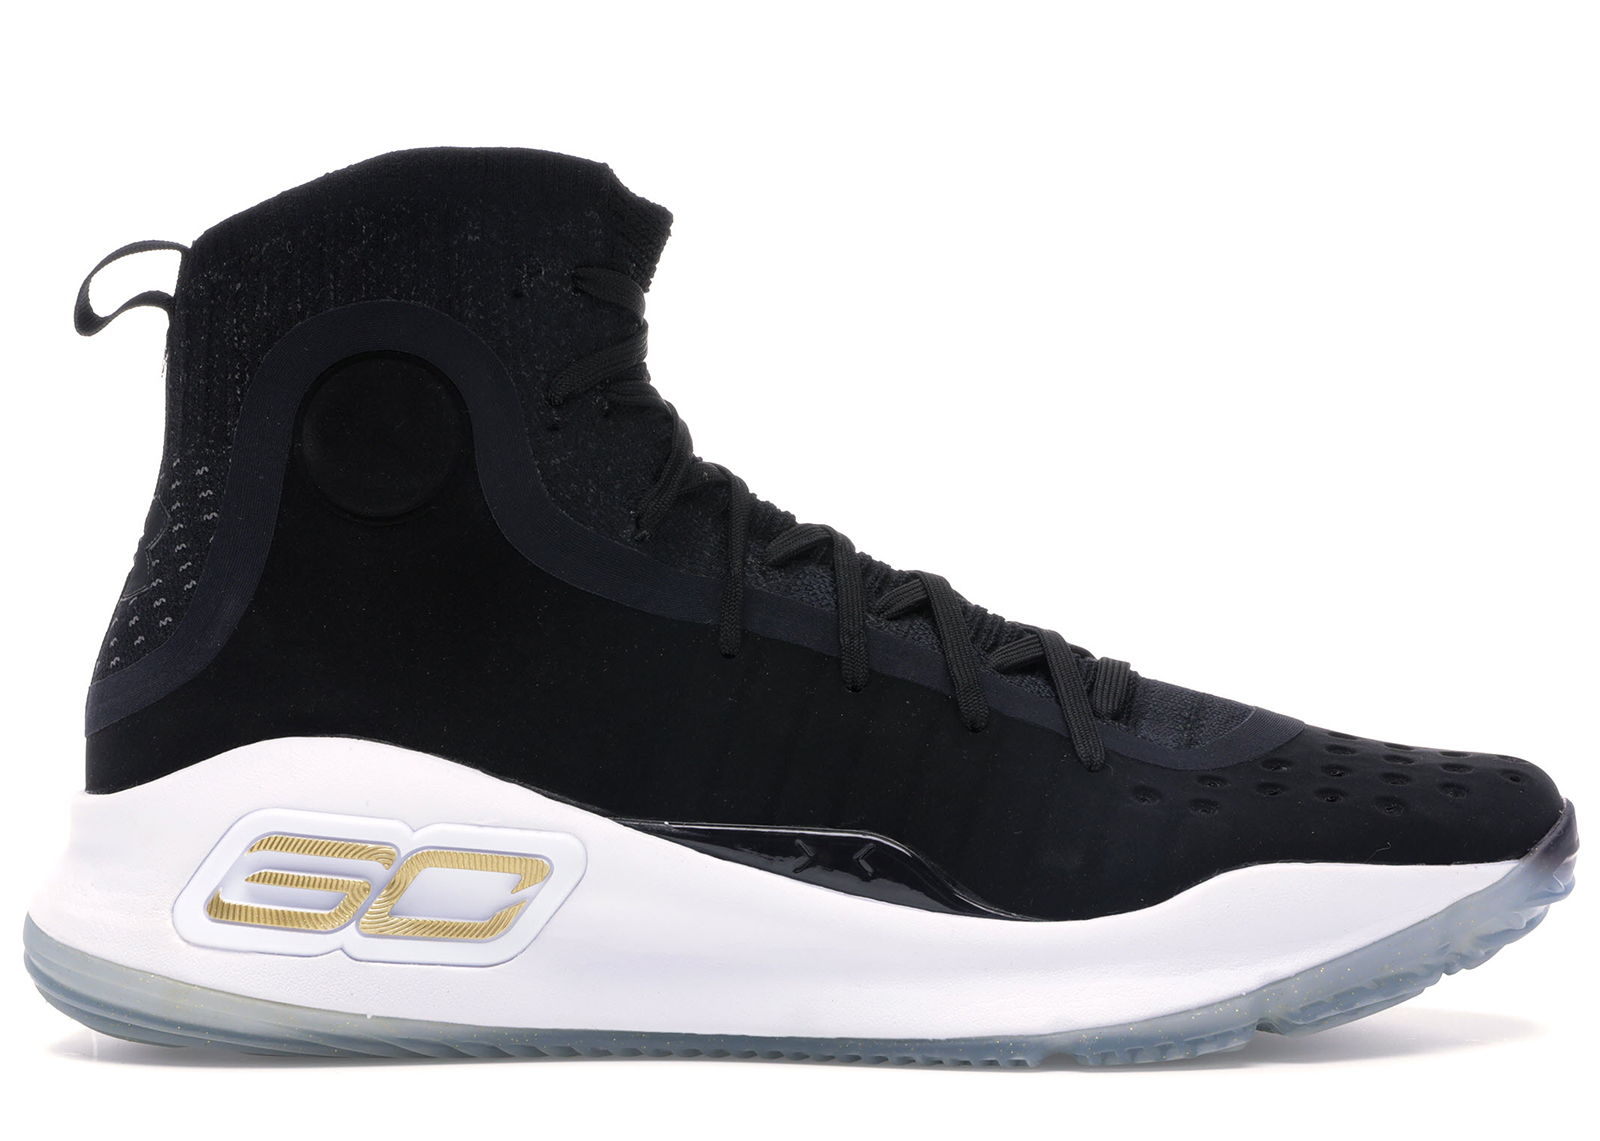 Under Armour Curry 4 More Dimes メンズ - 1298306-001 - JP